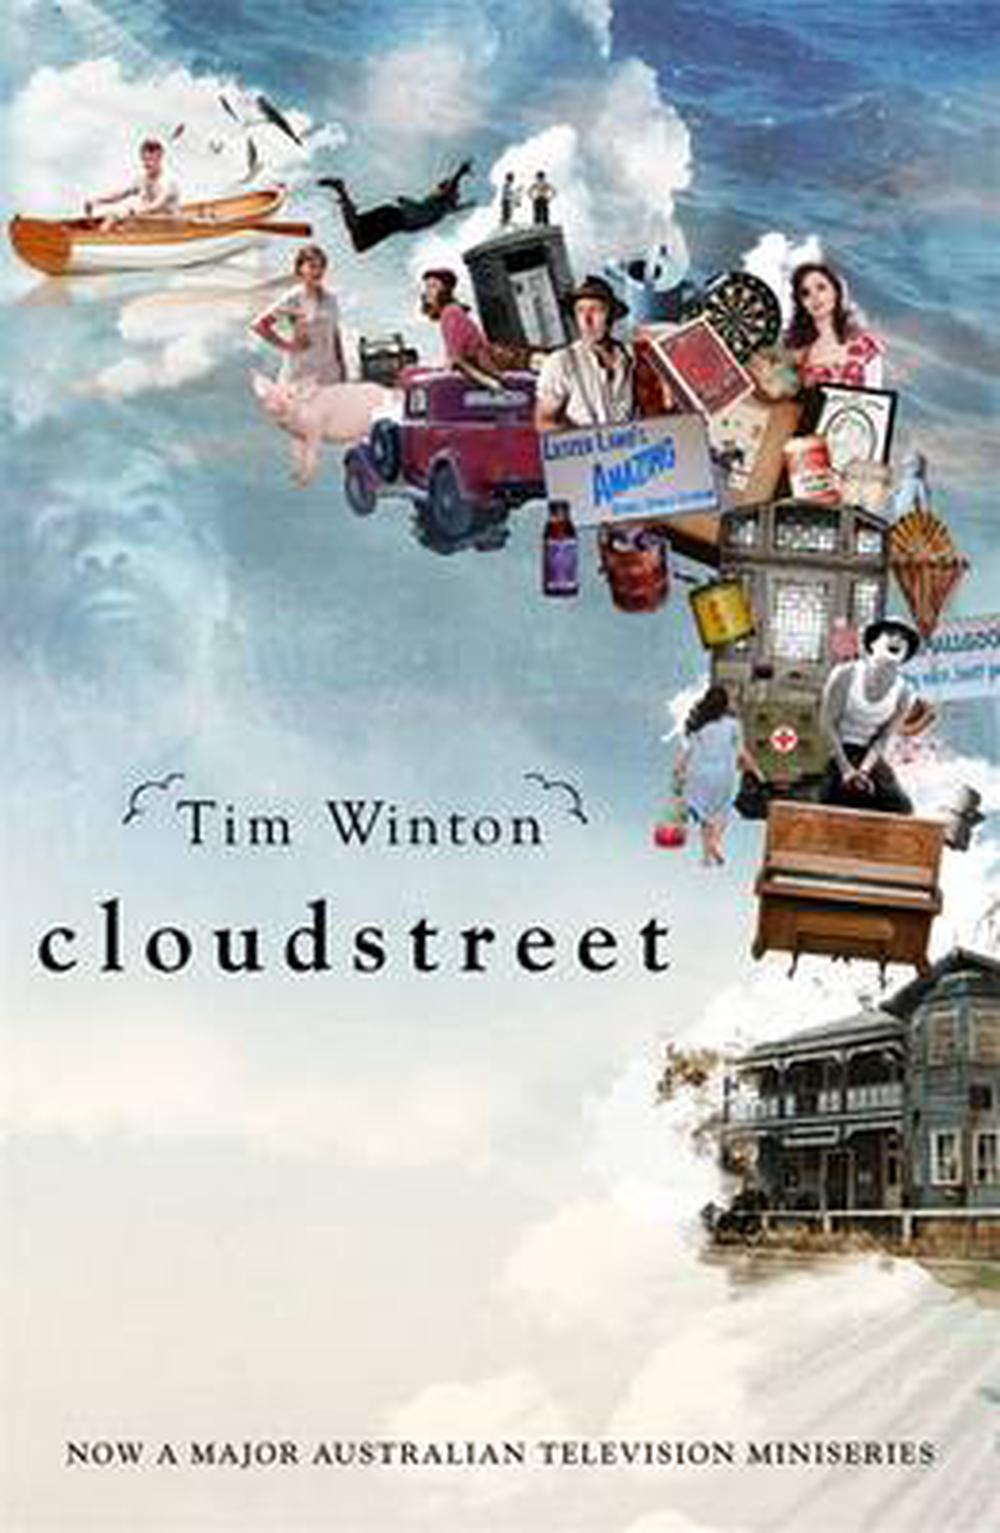 author of cloudstreet